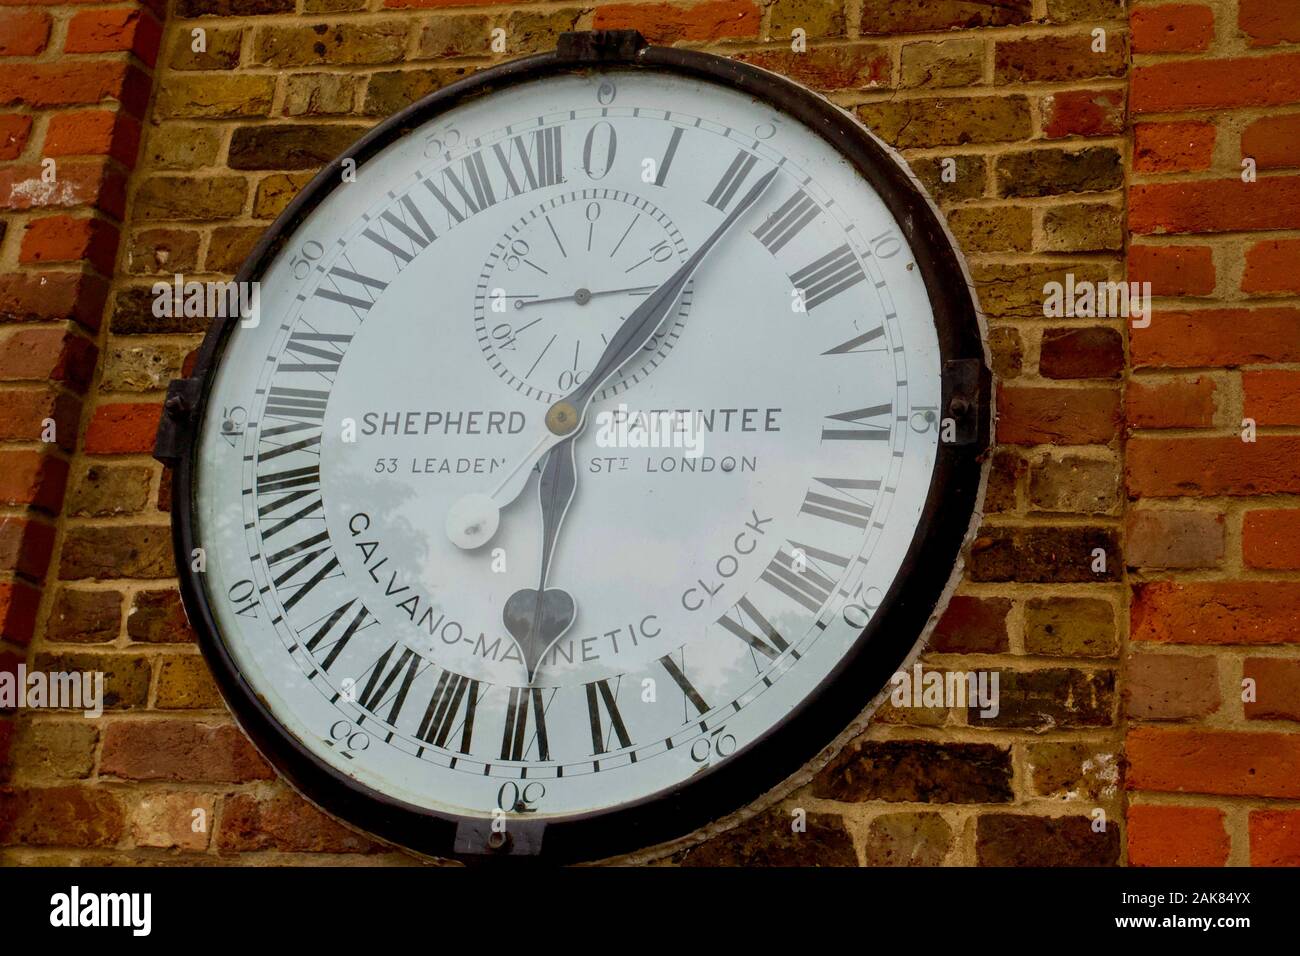 The Shepherd 24-hour gate clock at the Royal Observatory, Greenwich, London, England. Stock Photo